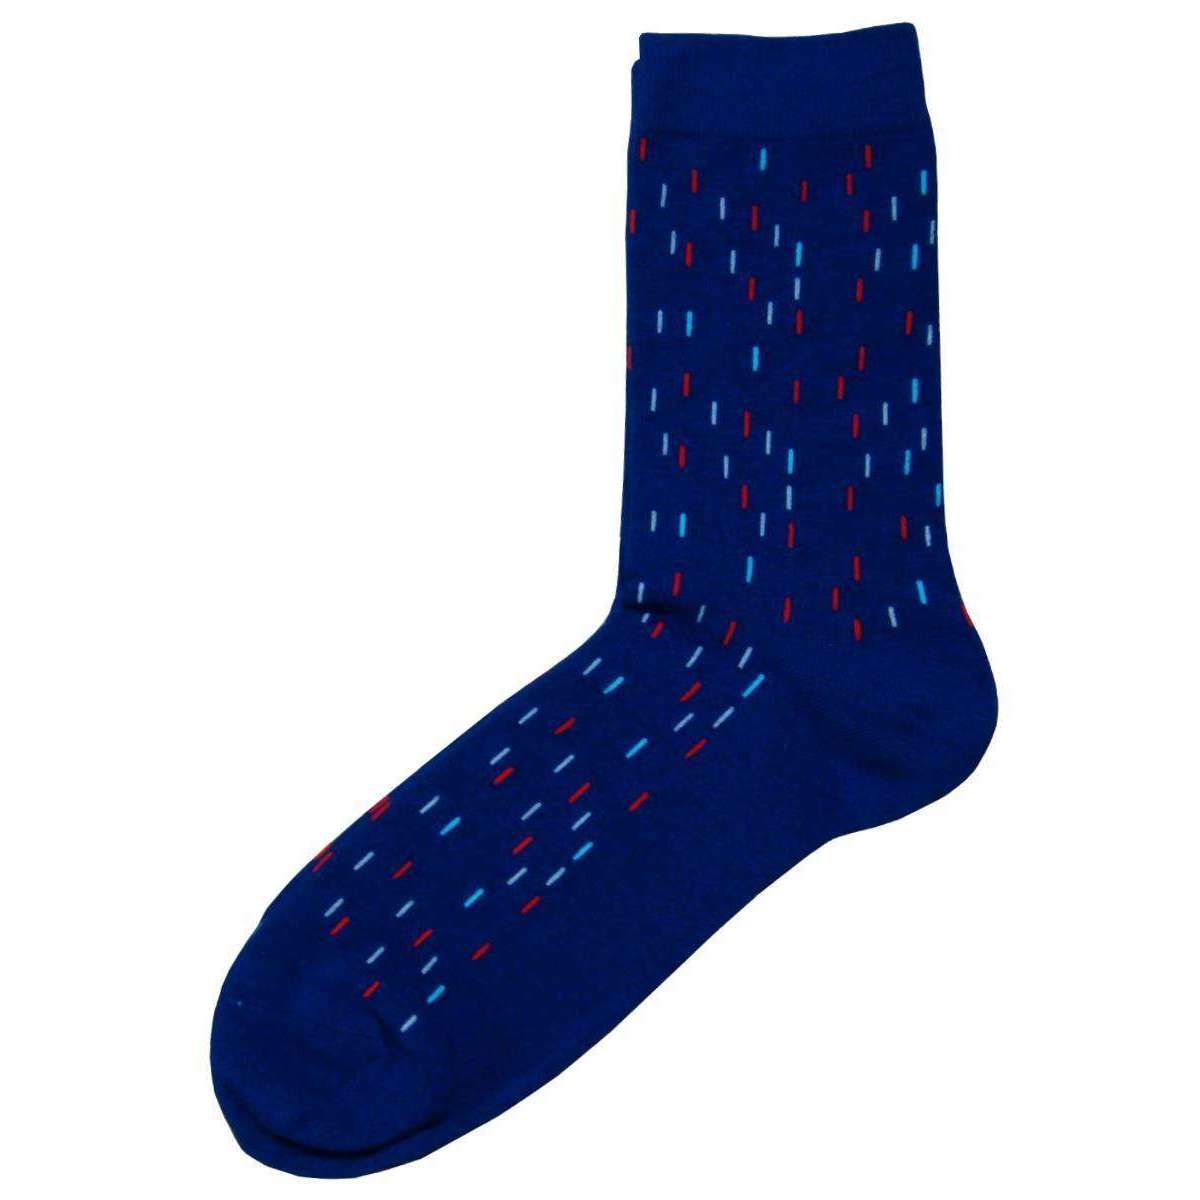 Bassin and Brown Mini Line Socks - Navy/Blue/Red